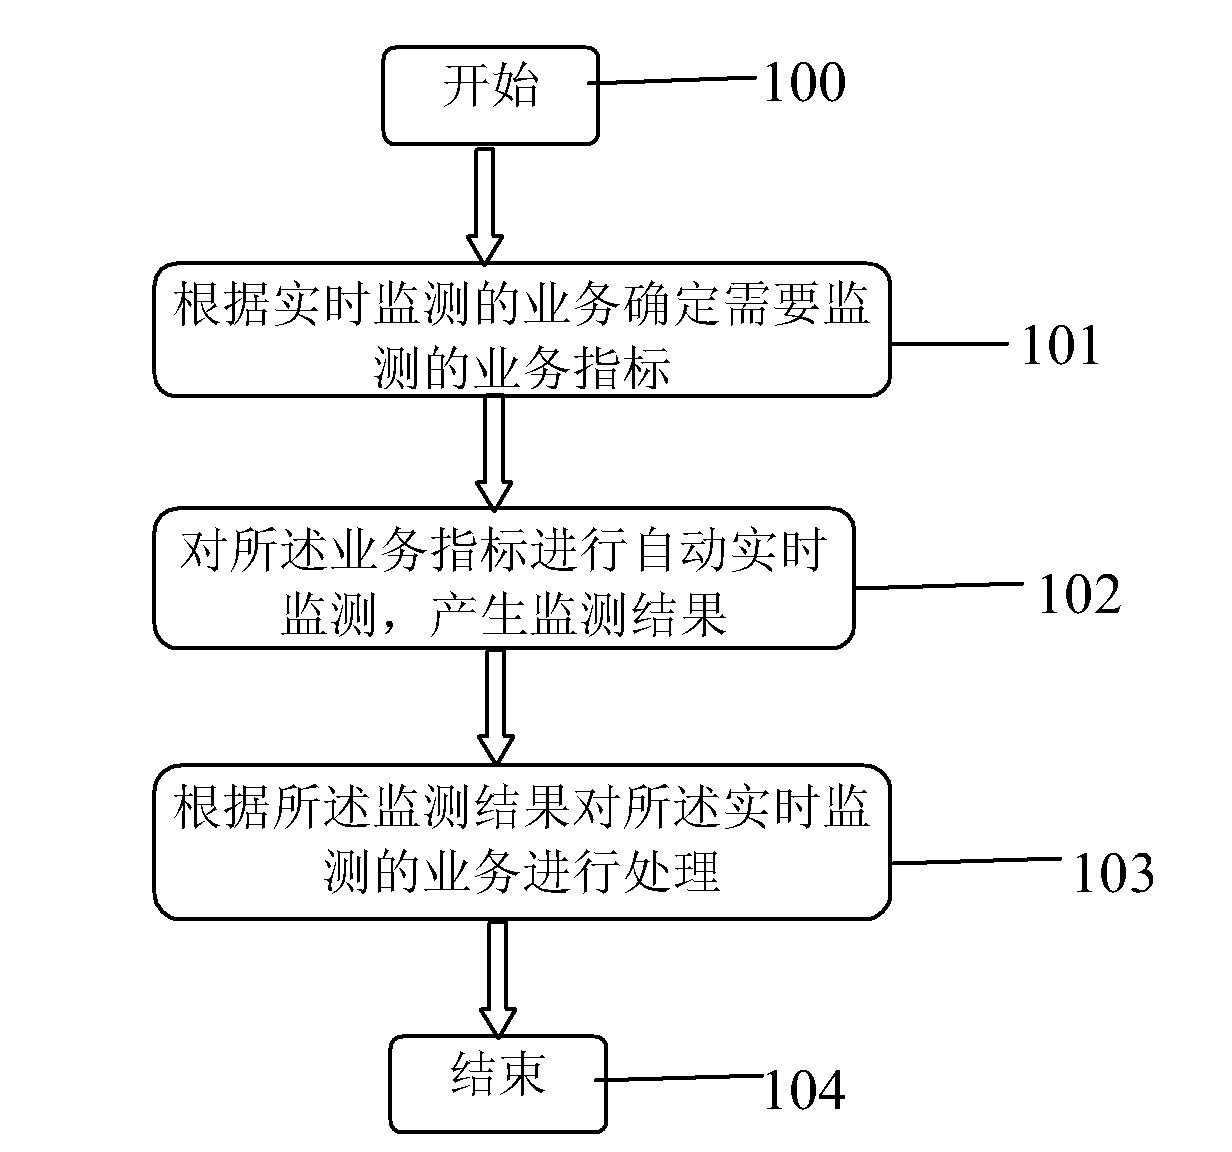 Service real-time monitoring method and system